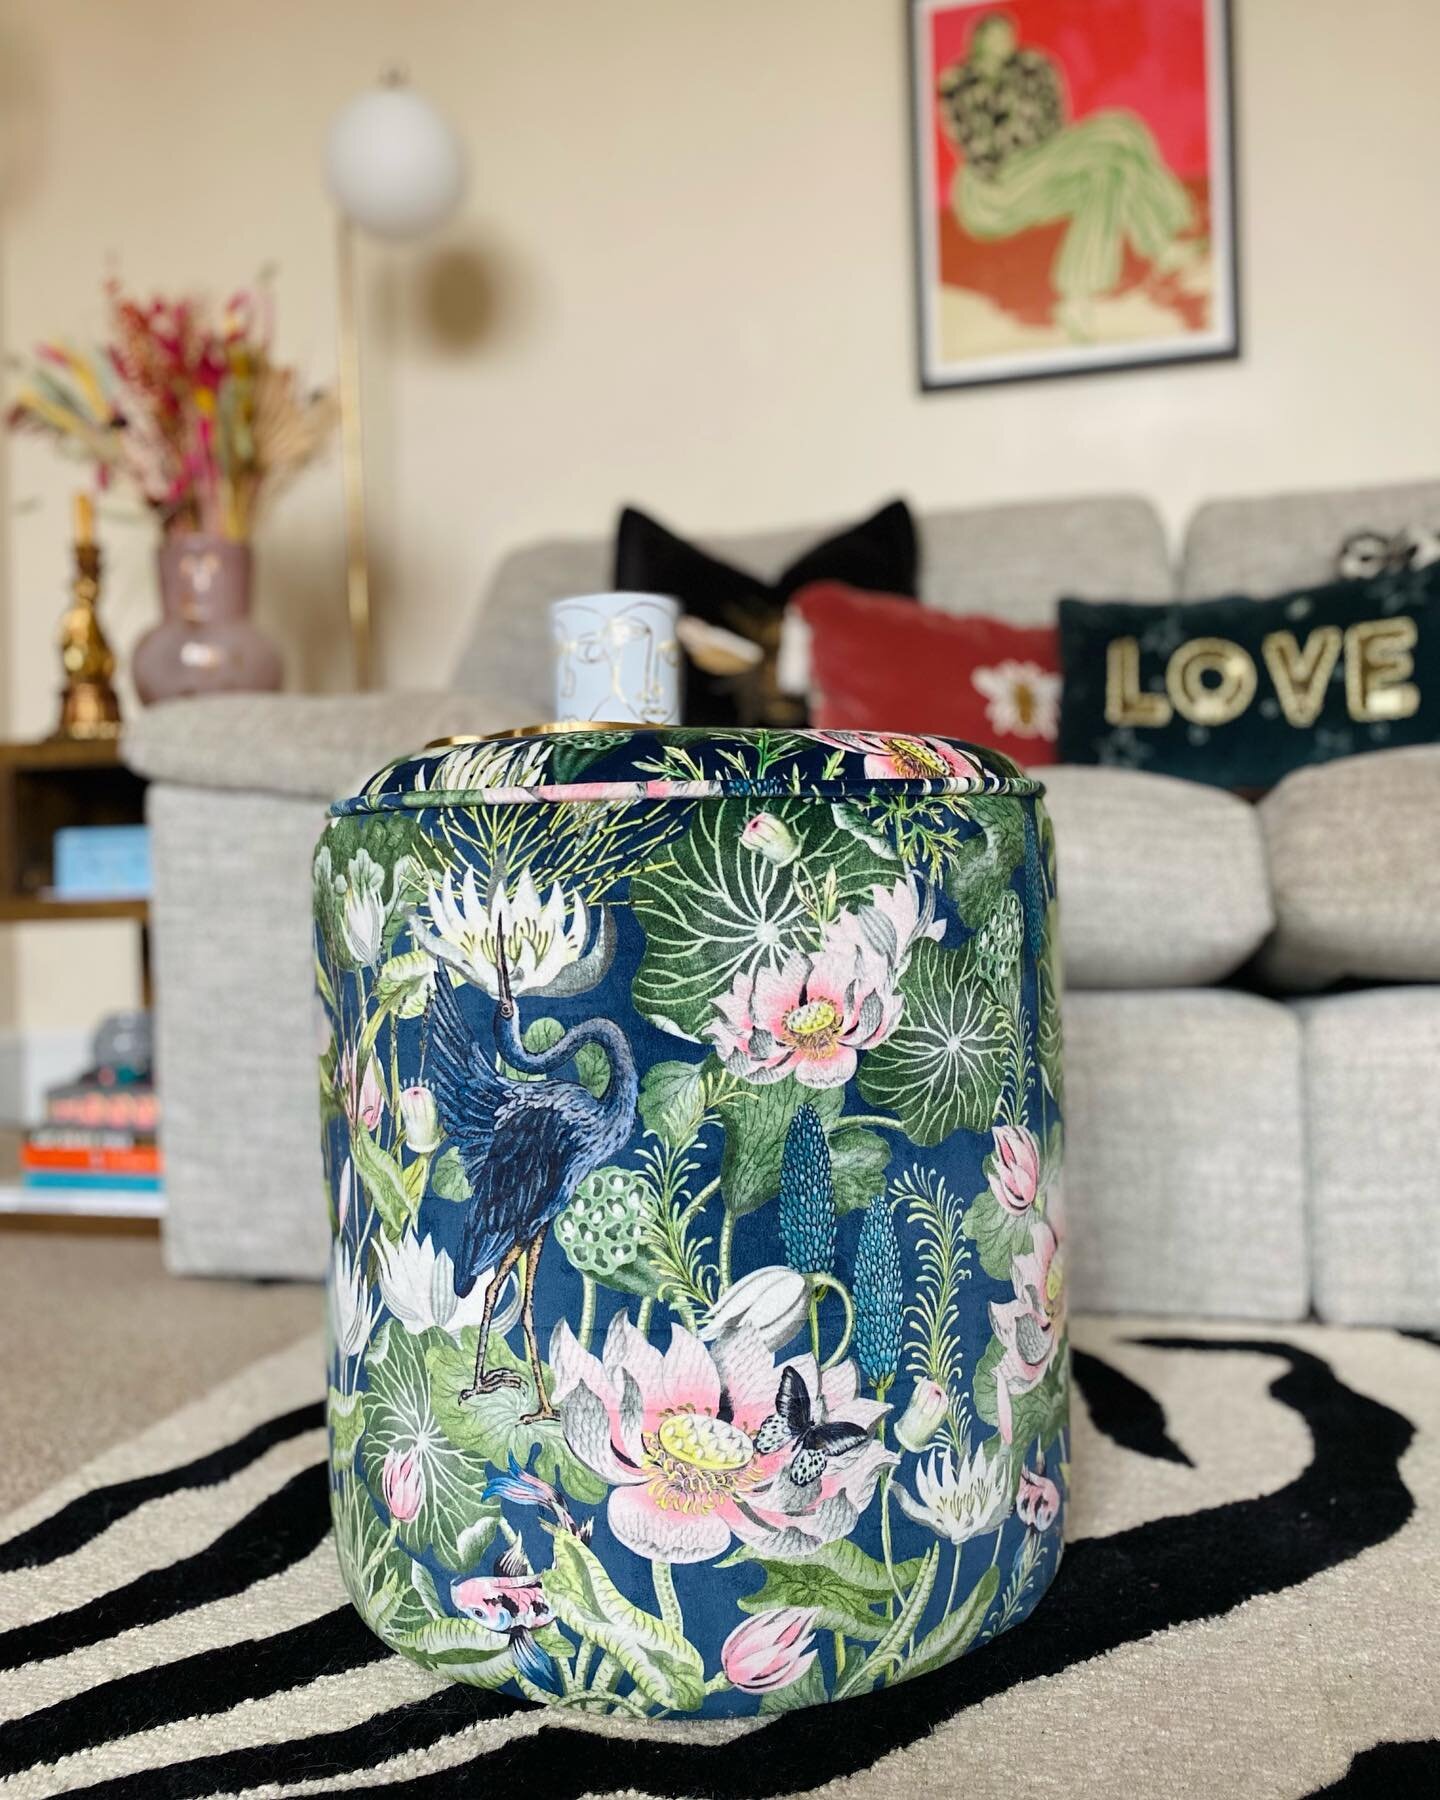 Waterlily Midnight Velvet 🌸💙
We are obsessed with this new Dressing Table Stool/Large Round Pouffe in fabulous Wedgwood @clarke_clarke_interiors Waterlily Midnight Velvet!

Created for one of our lovely customers, we will be adding this option onto